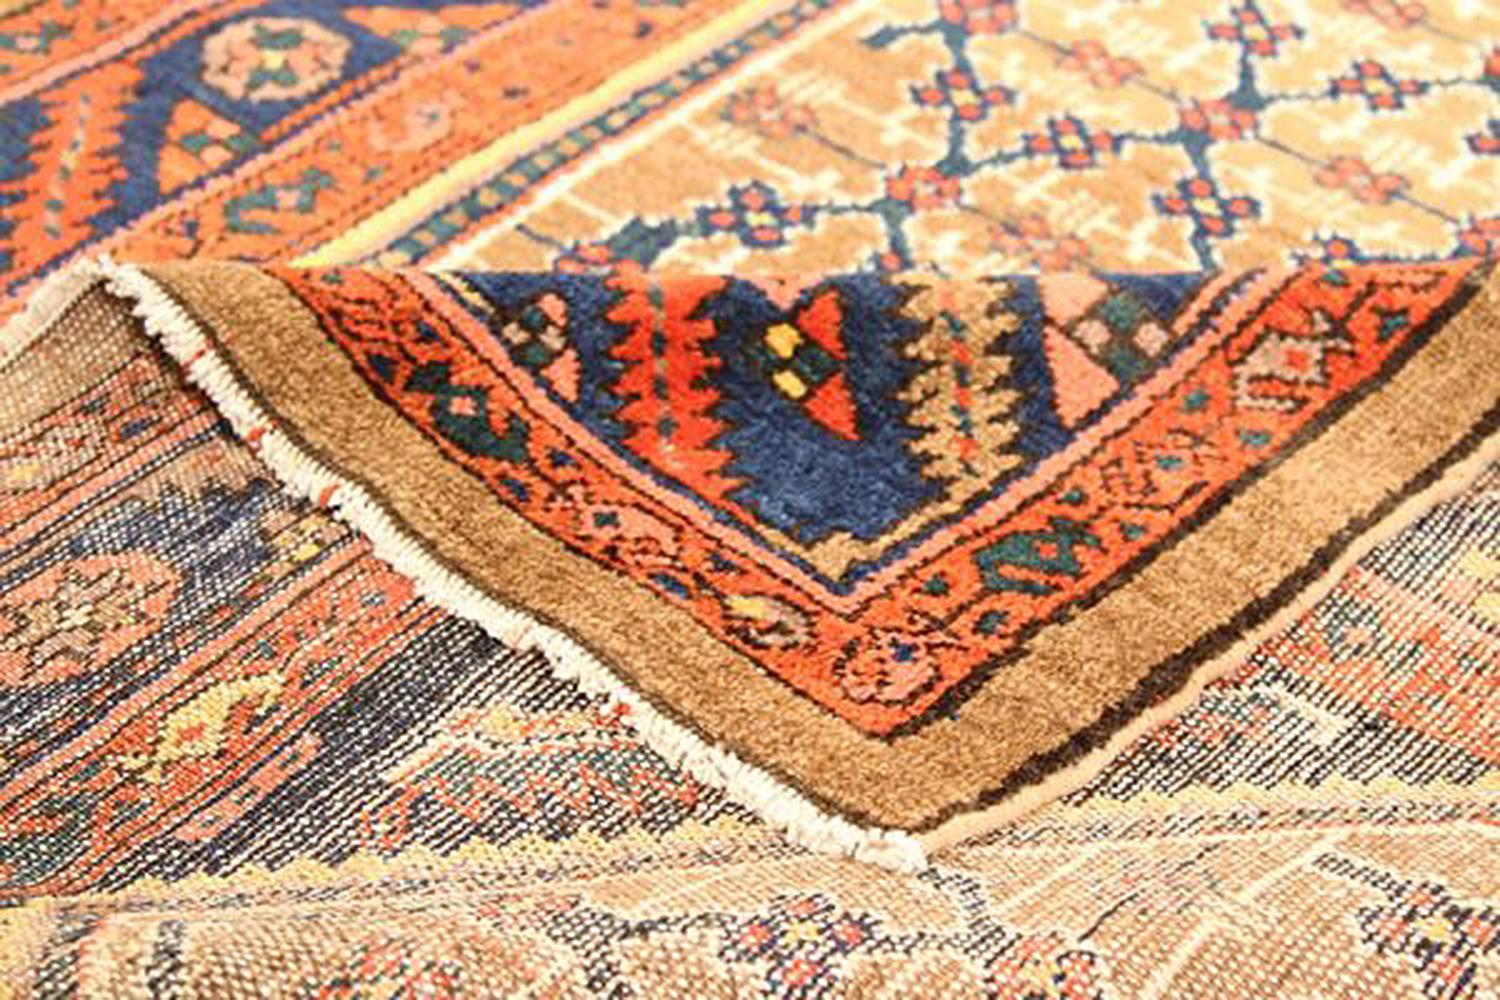 Islamic Antique Persian Sarab Runner Rug with Navy and Brown Floral Details For Sale